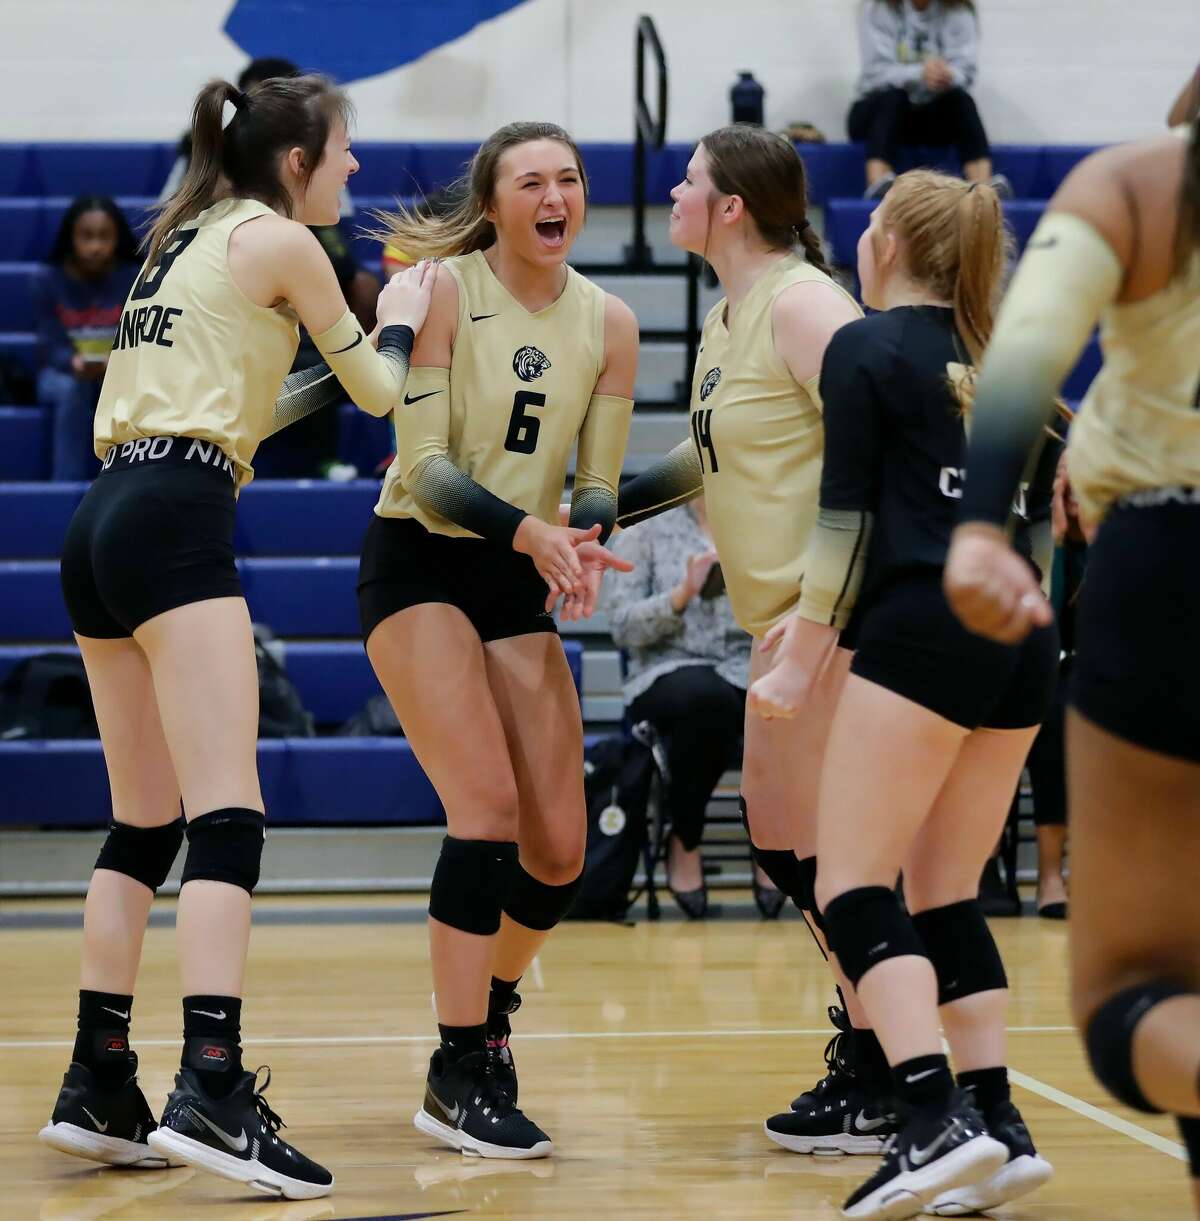 Conroe players celebrate after winning a point against Nimitz during their Region II-6A bi-district volleyball match at Nimitz High School Monday, Oct. 31, 2022 in Houston, TX.